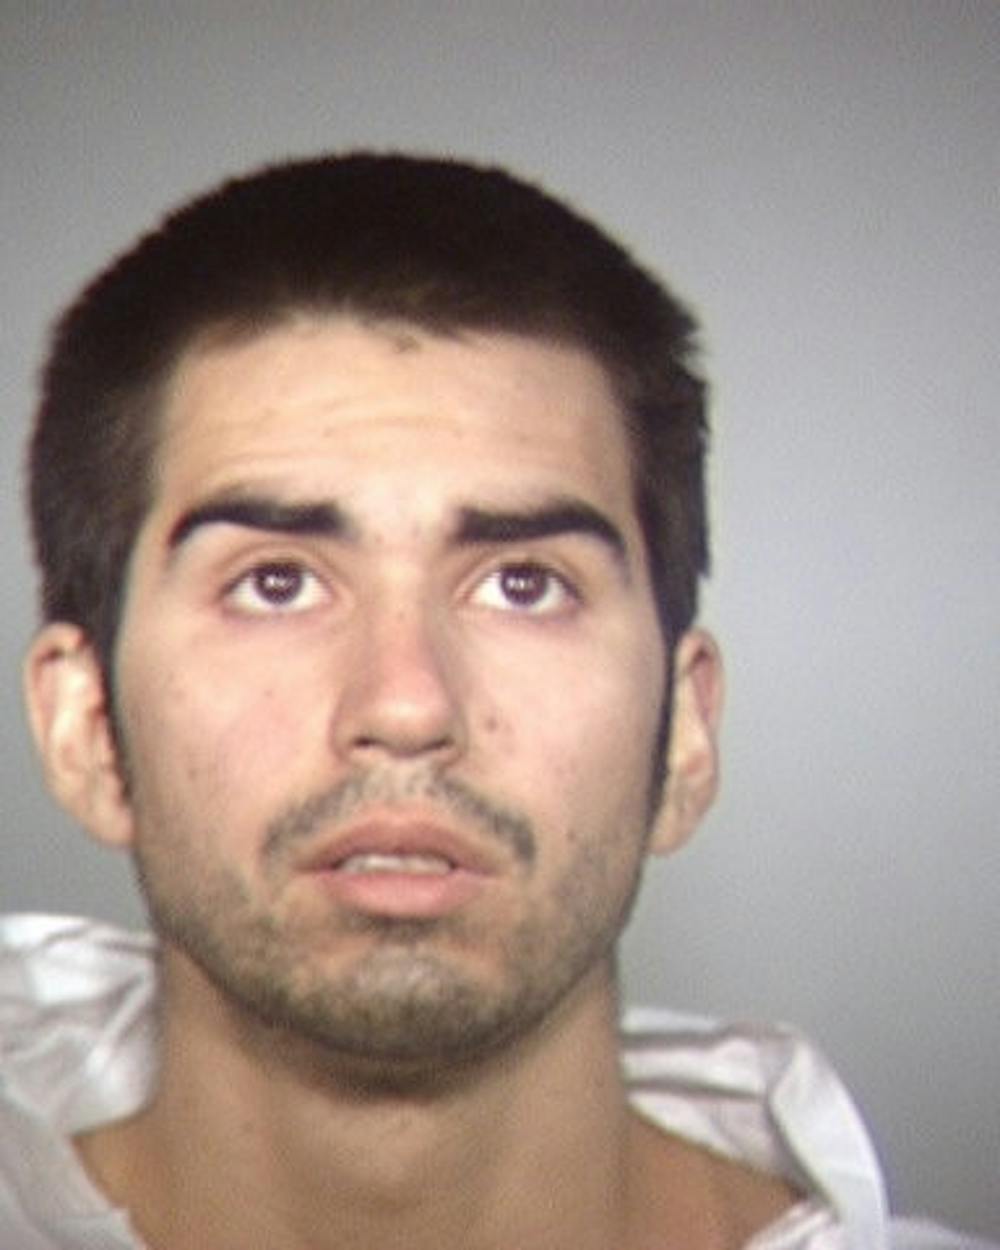 Luis Gerardo Soltero, 23, was sentenced to 30 years in prison on Friday after he was found guilty of killing an ASU student, 19-year-old Rebecca Kasper. (Photo courtesy of Tempe Police Department)